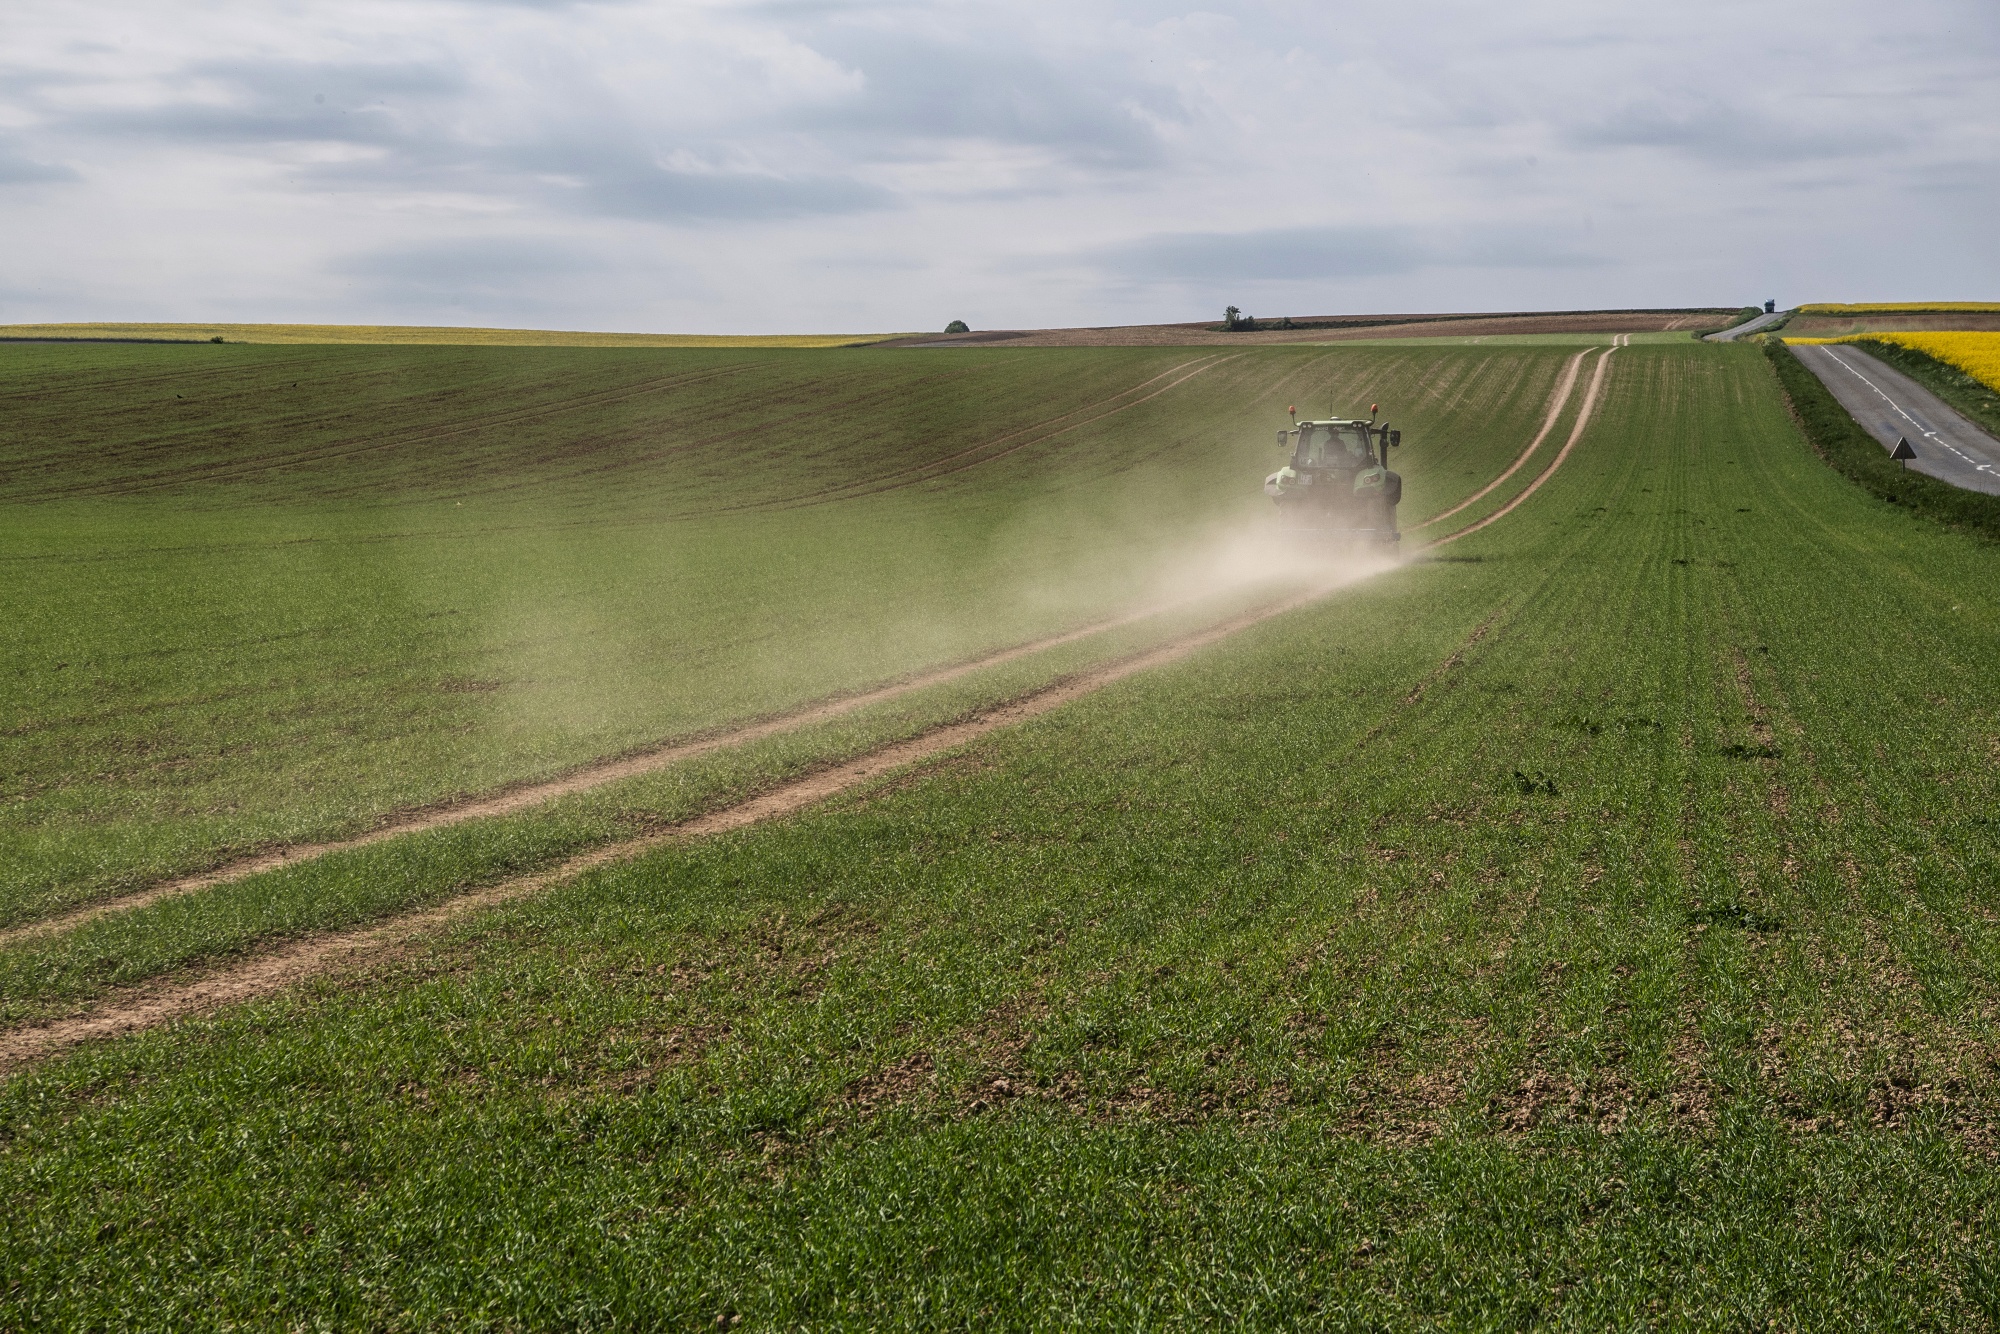 A tractor kicks up dust at a farm&nbsp;during drought conditions,&nbsp;in Aisne, France, in April.